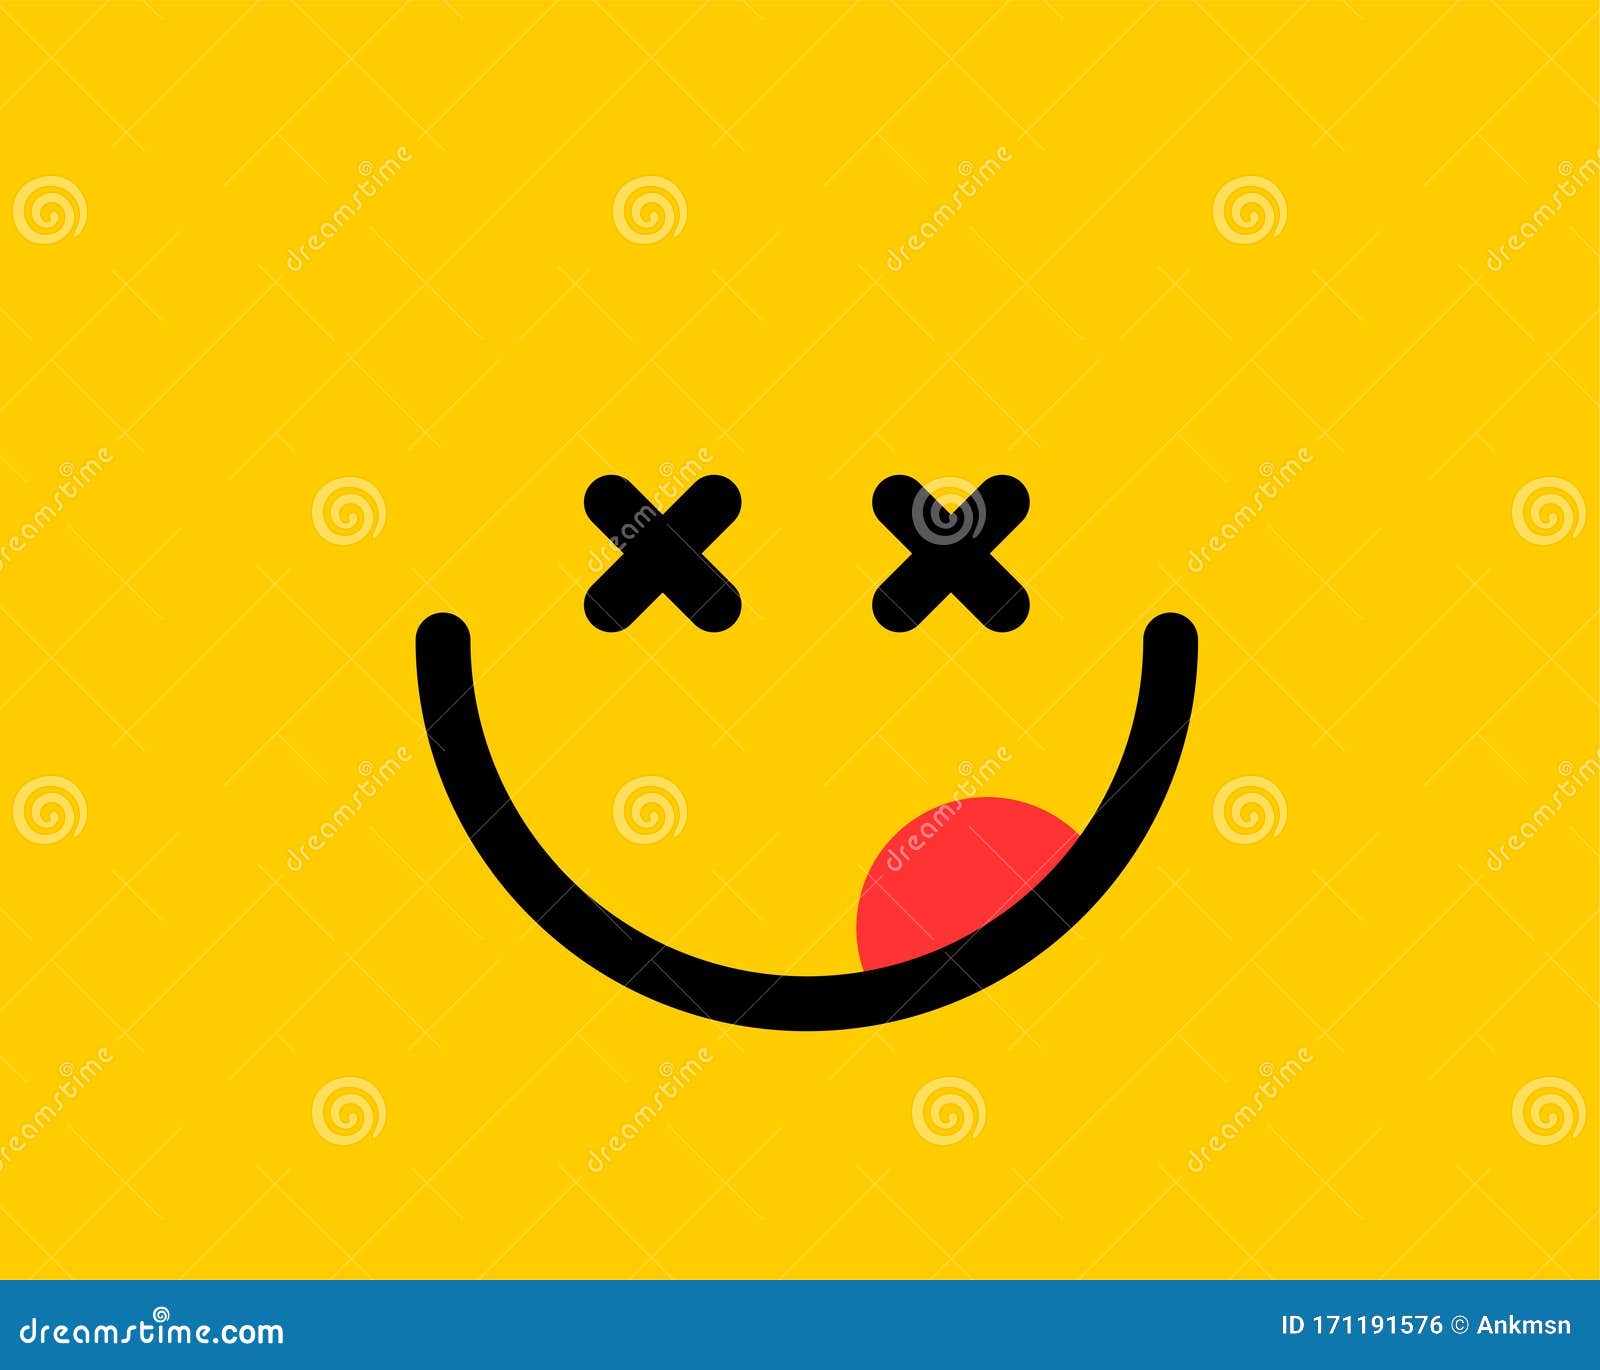 Emoji Smile Icon Vector Symbol on Yellow Background. Smiley Face Cartoon  Character Wallpaper Stock Vector - Illustration of emoticon, background:  171191576